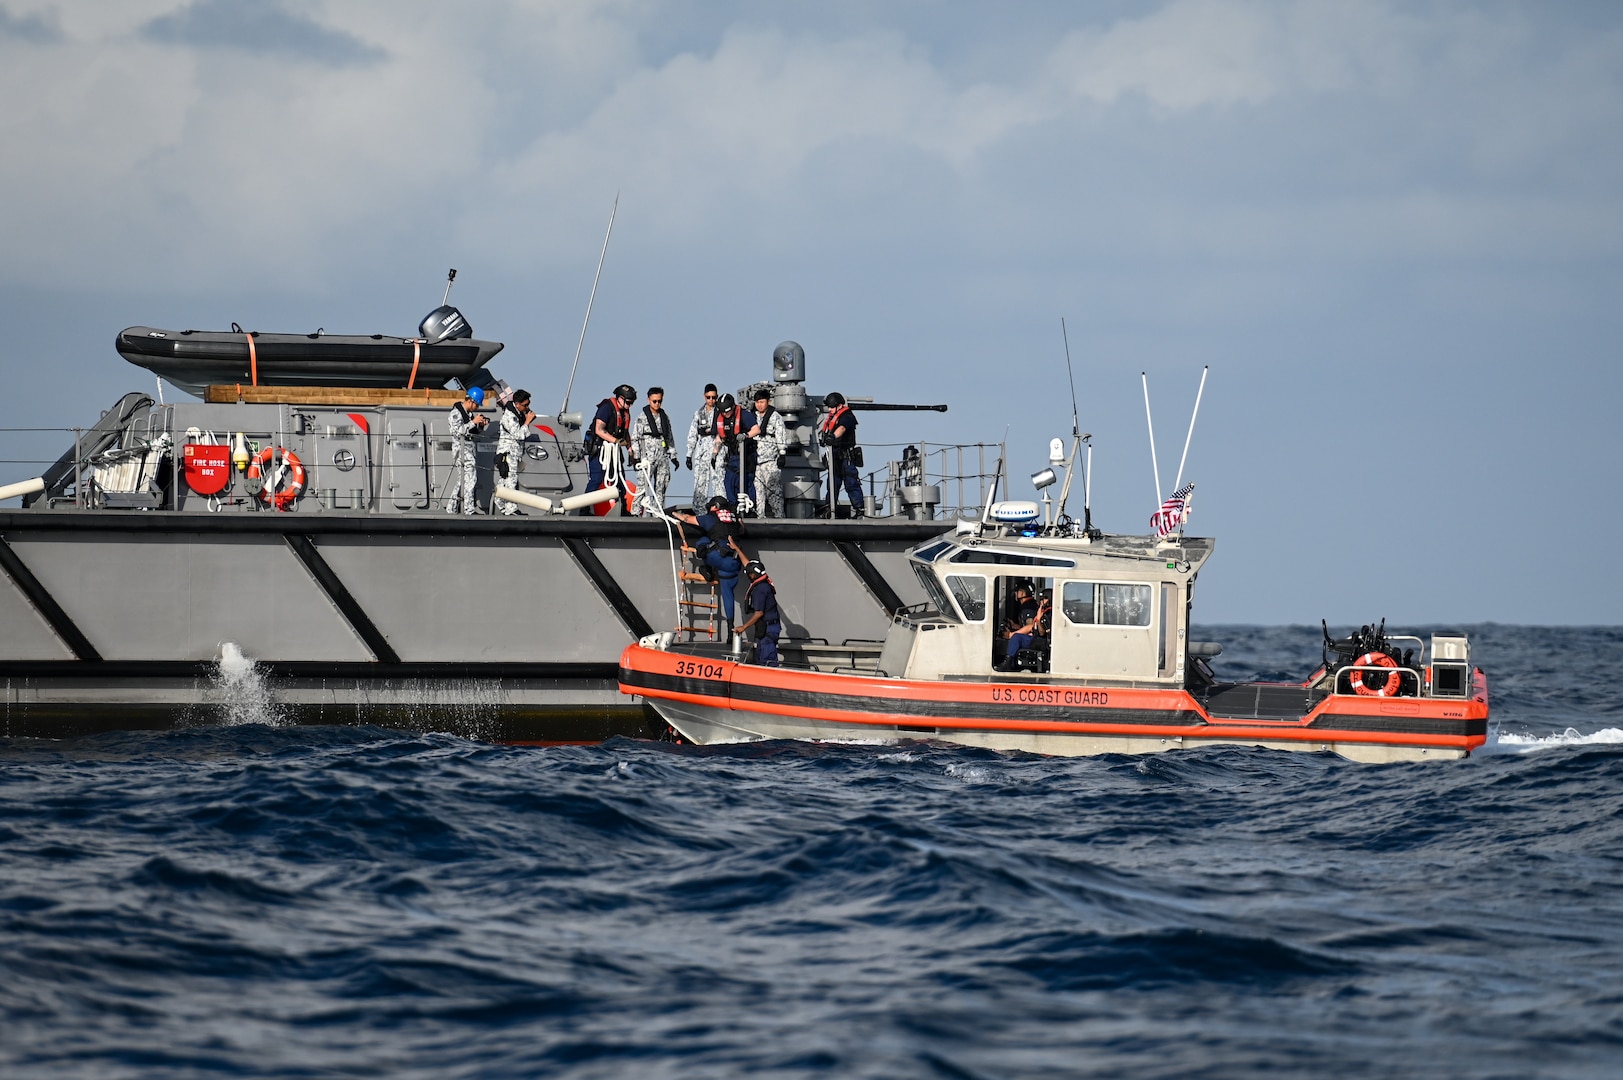 A long-range intercept boat from U.S. Coast Guard Cutter Bertholf (WMSL 750) approaches a Republic of Singapore Navy vessel during a boarding exercise conducted off the coast of Singapore, Feb. 29, 2024. The boarding exercise provided members from both services an opportunity to collaborate on best practices for at-sea evolutions. (U.S. Coast Guard photo by Petty Officer Steve Strohmaier)